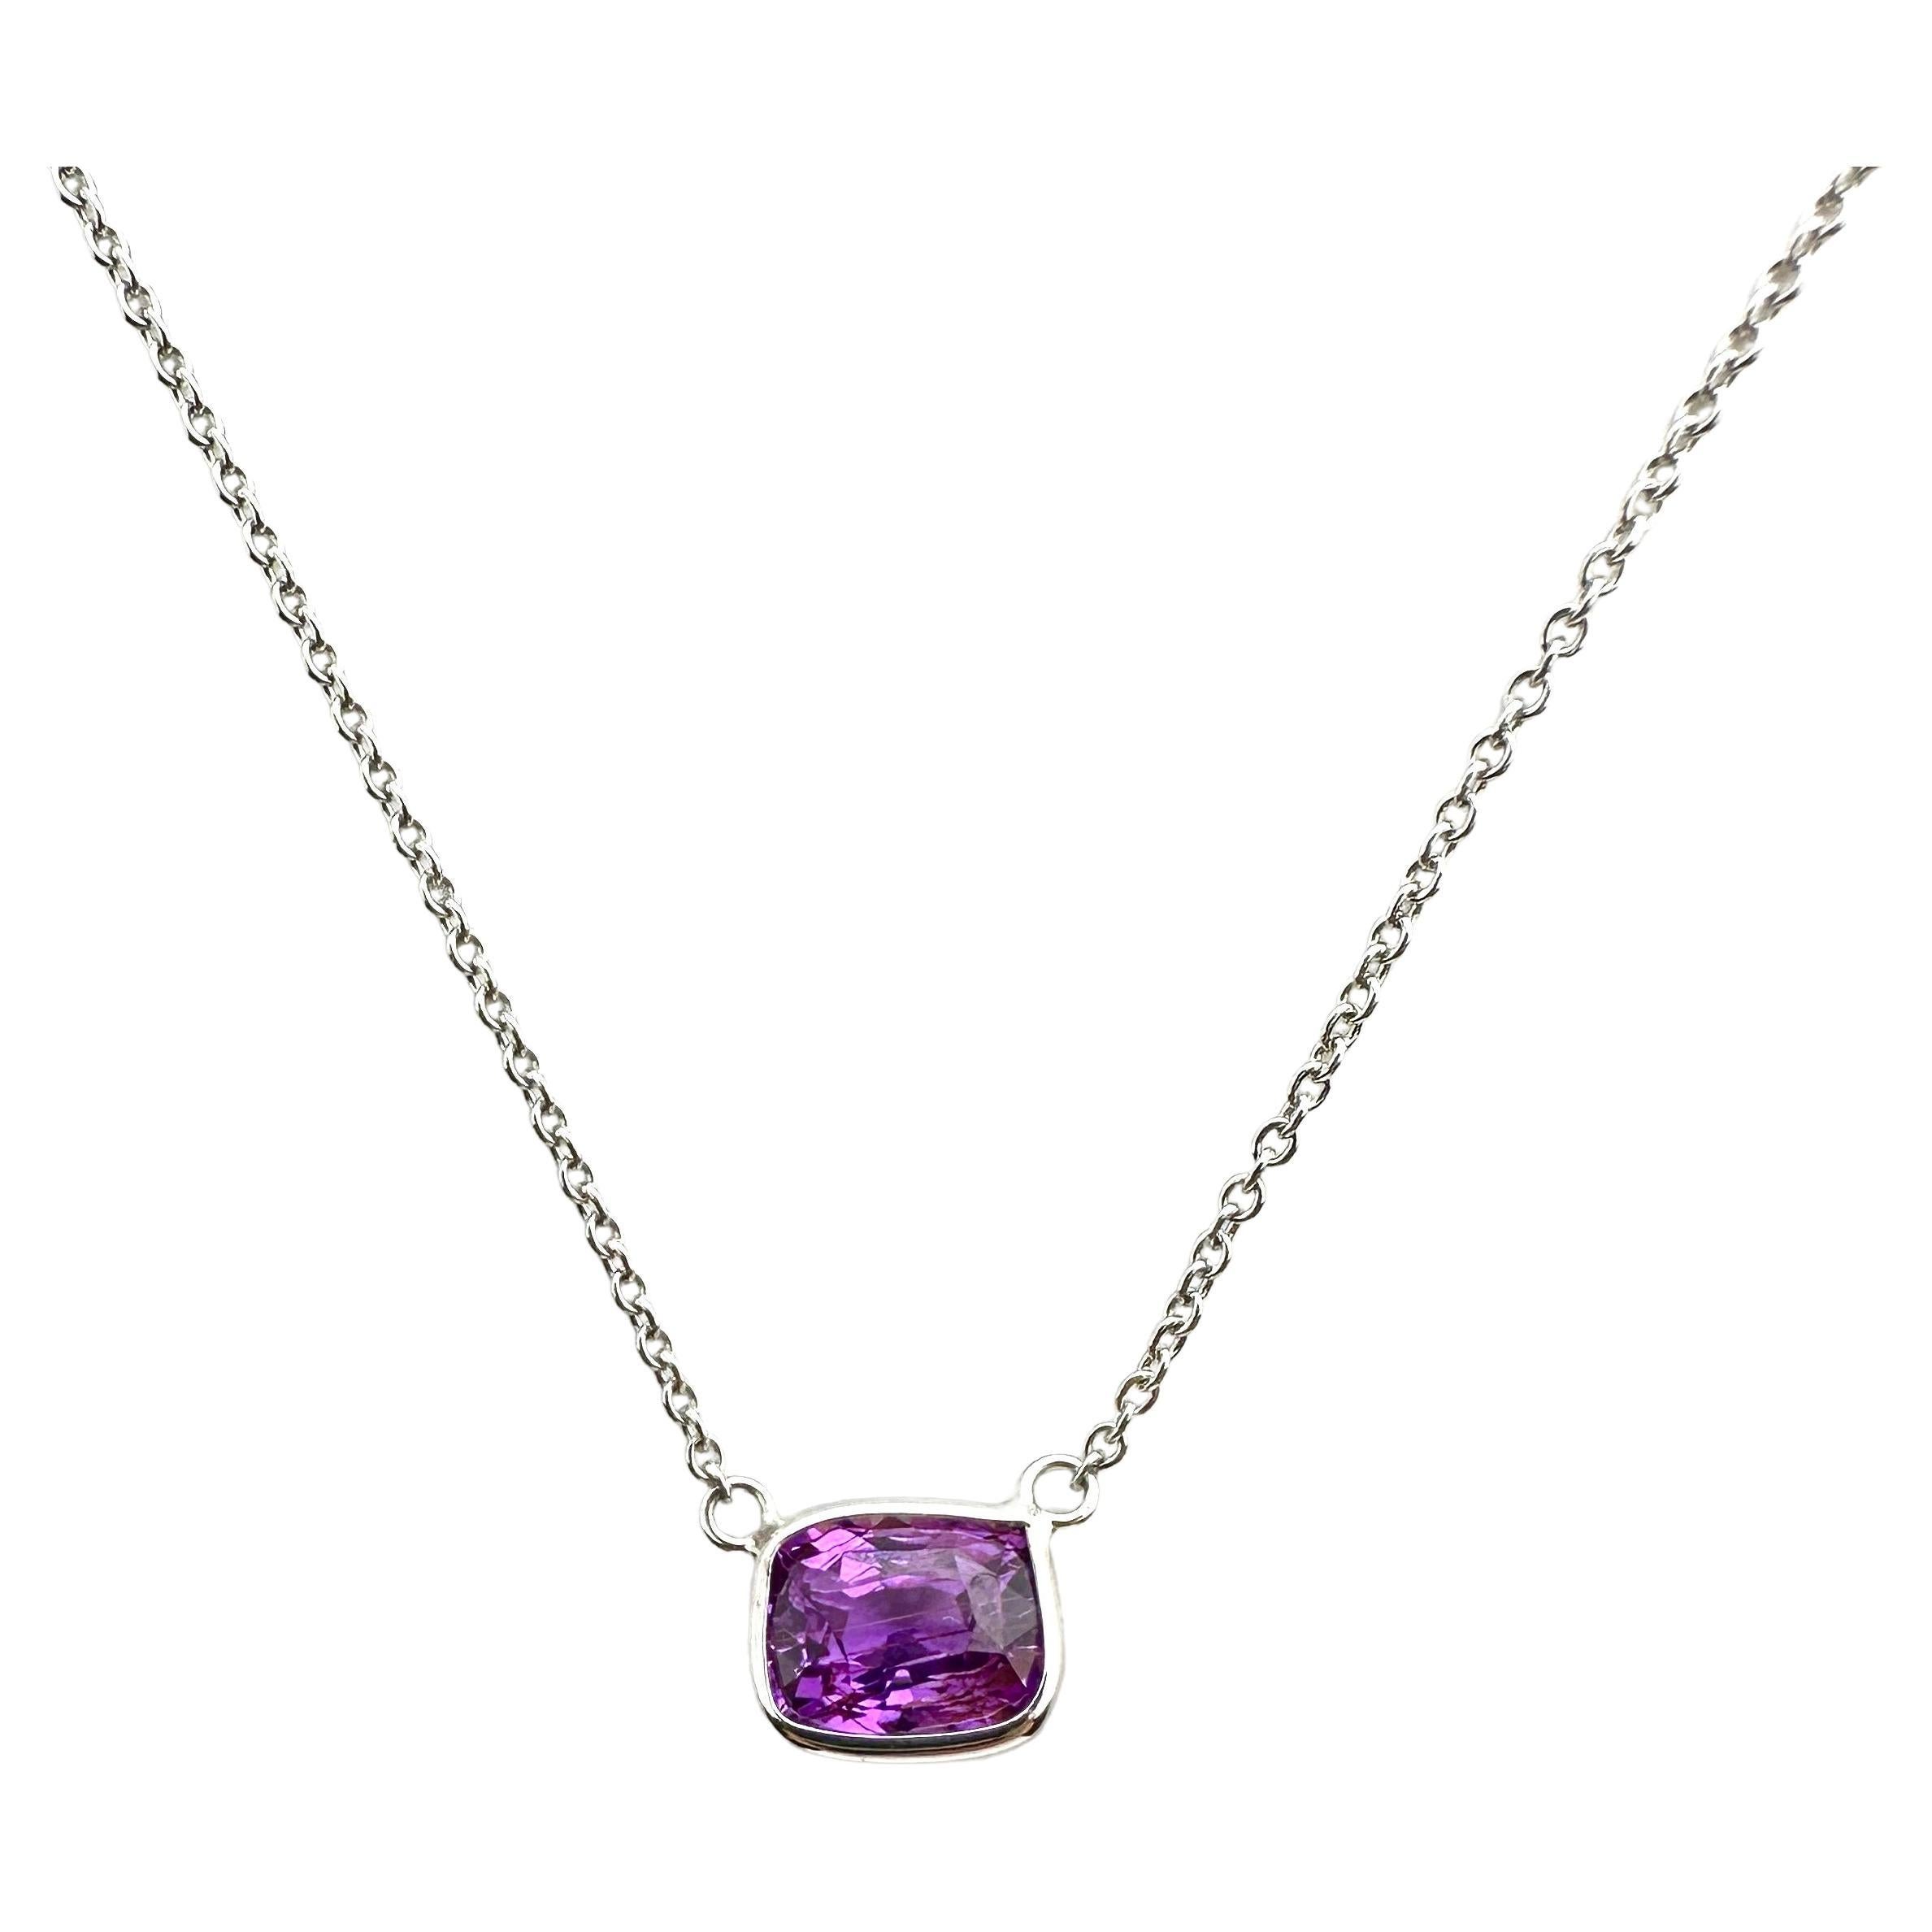 1.93ct Certified Purple Sapphire Cushion Cut Solitaire Necklace in 14k in WG For Sale